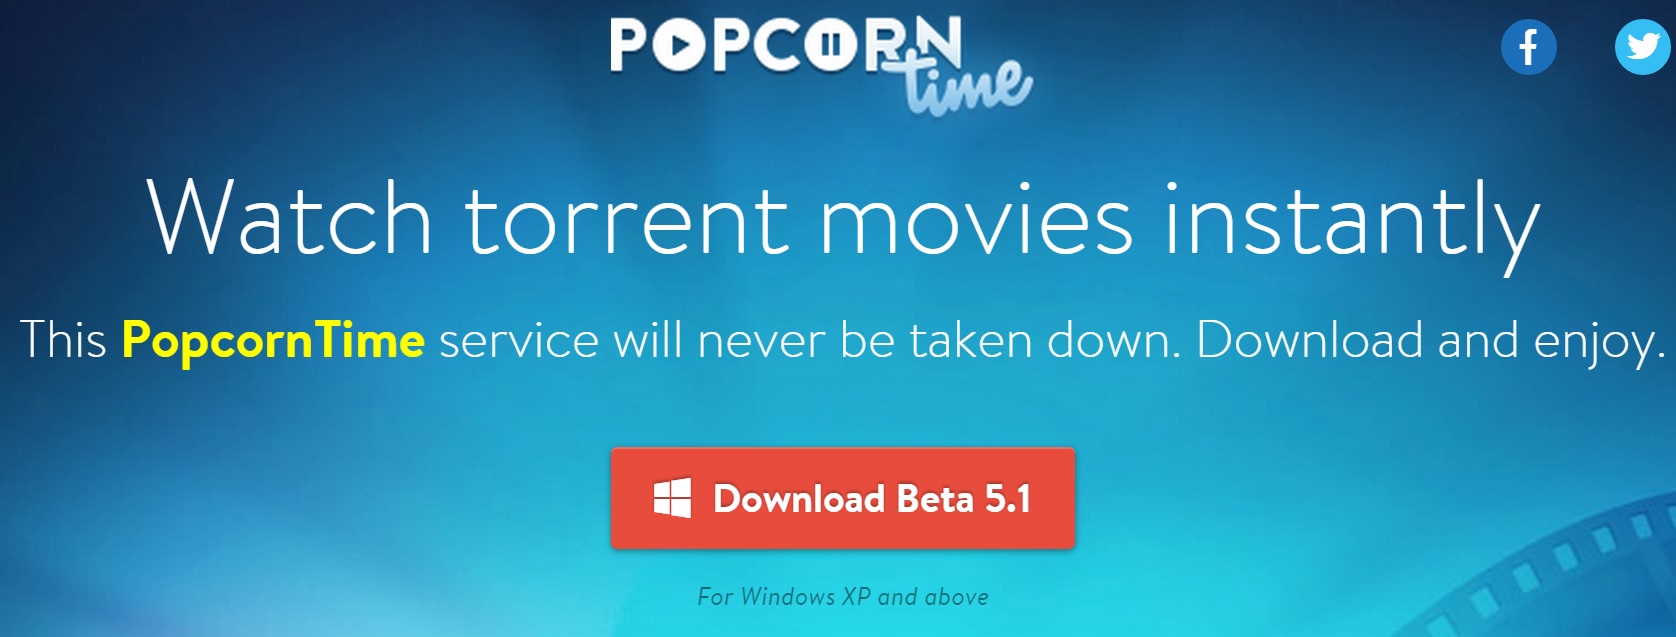 popcorn time ios installer taking long time on step 2